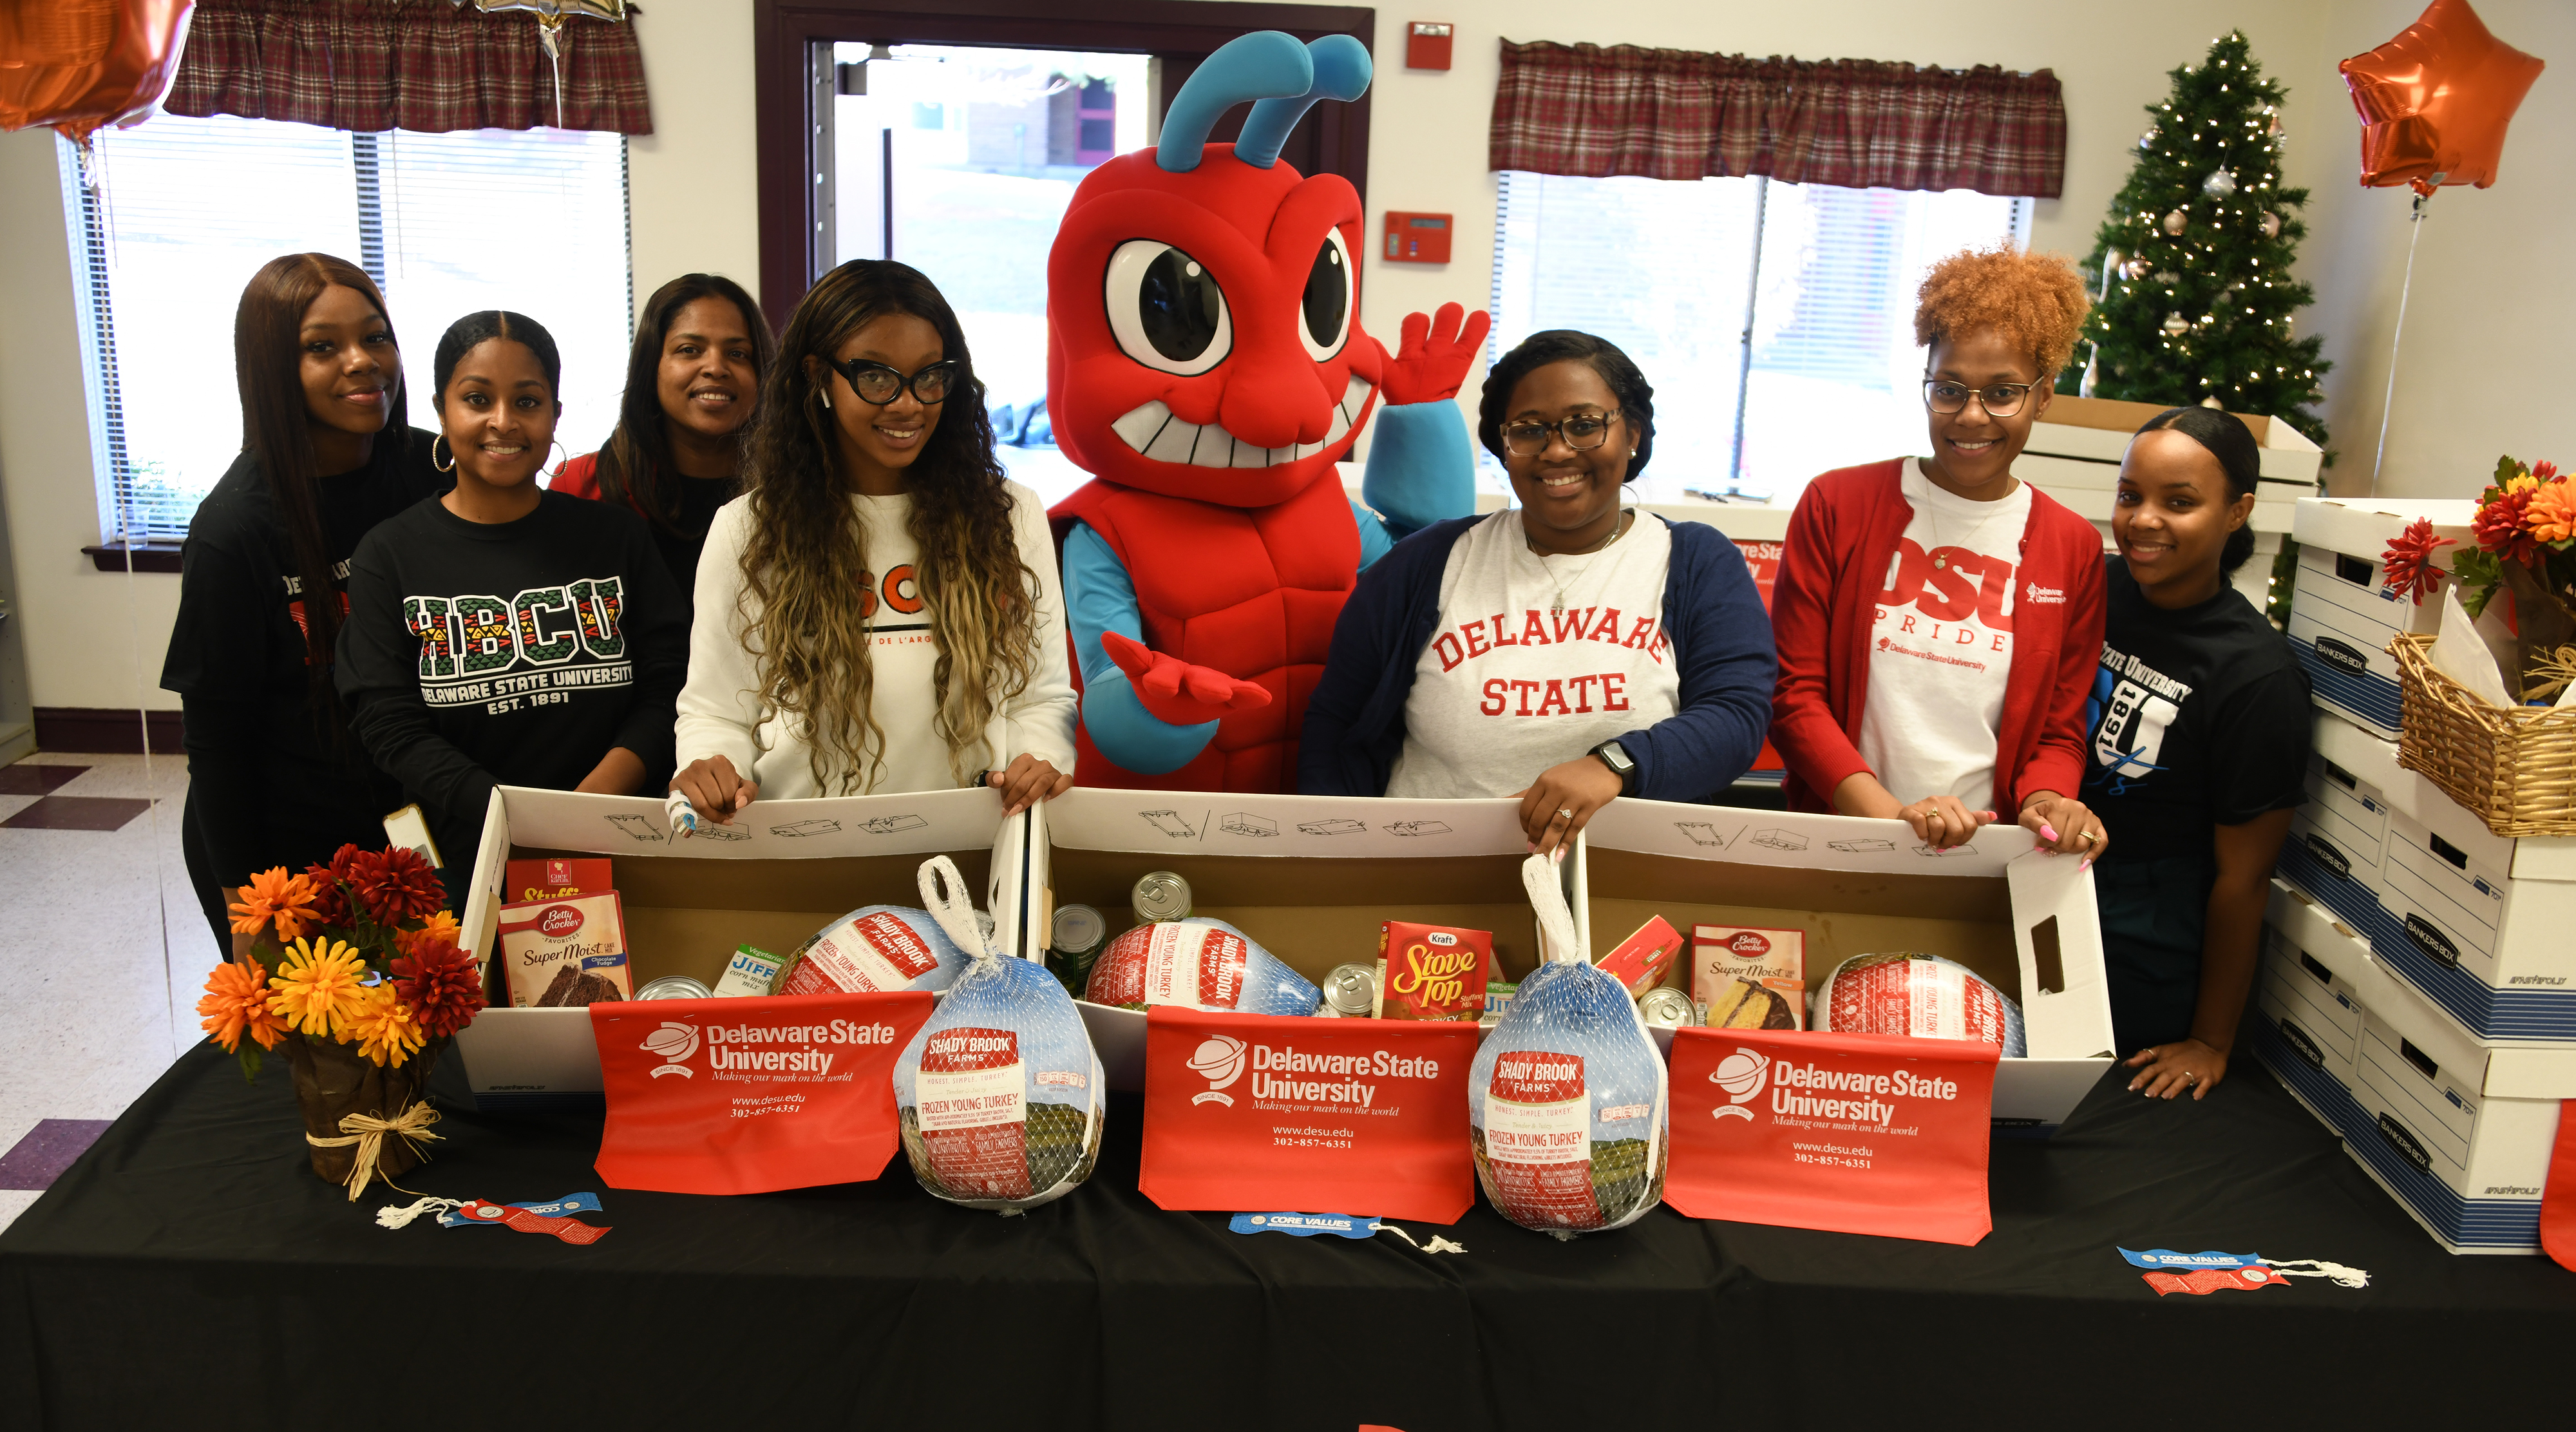 These Enrollment Management members -- (l-r) Destiney Woodson, Shelvia Wright, Andrea Wilson, Siara Bey, the Too Fly Hornet Mascot, Melayna Hall, Tiara Dennis, and Gernelle Forrest -- distributed Thanksgiving dinner items in Smyrna. Another group of their colleagues did the same at a Dover location